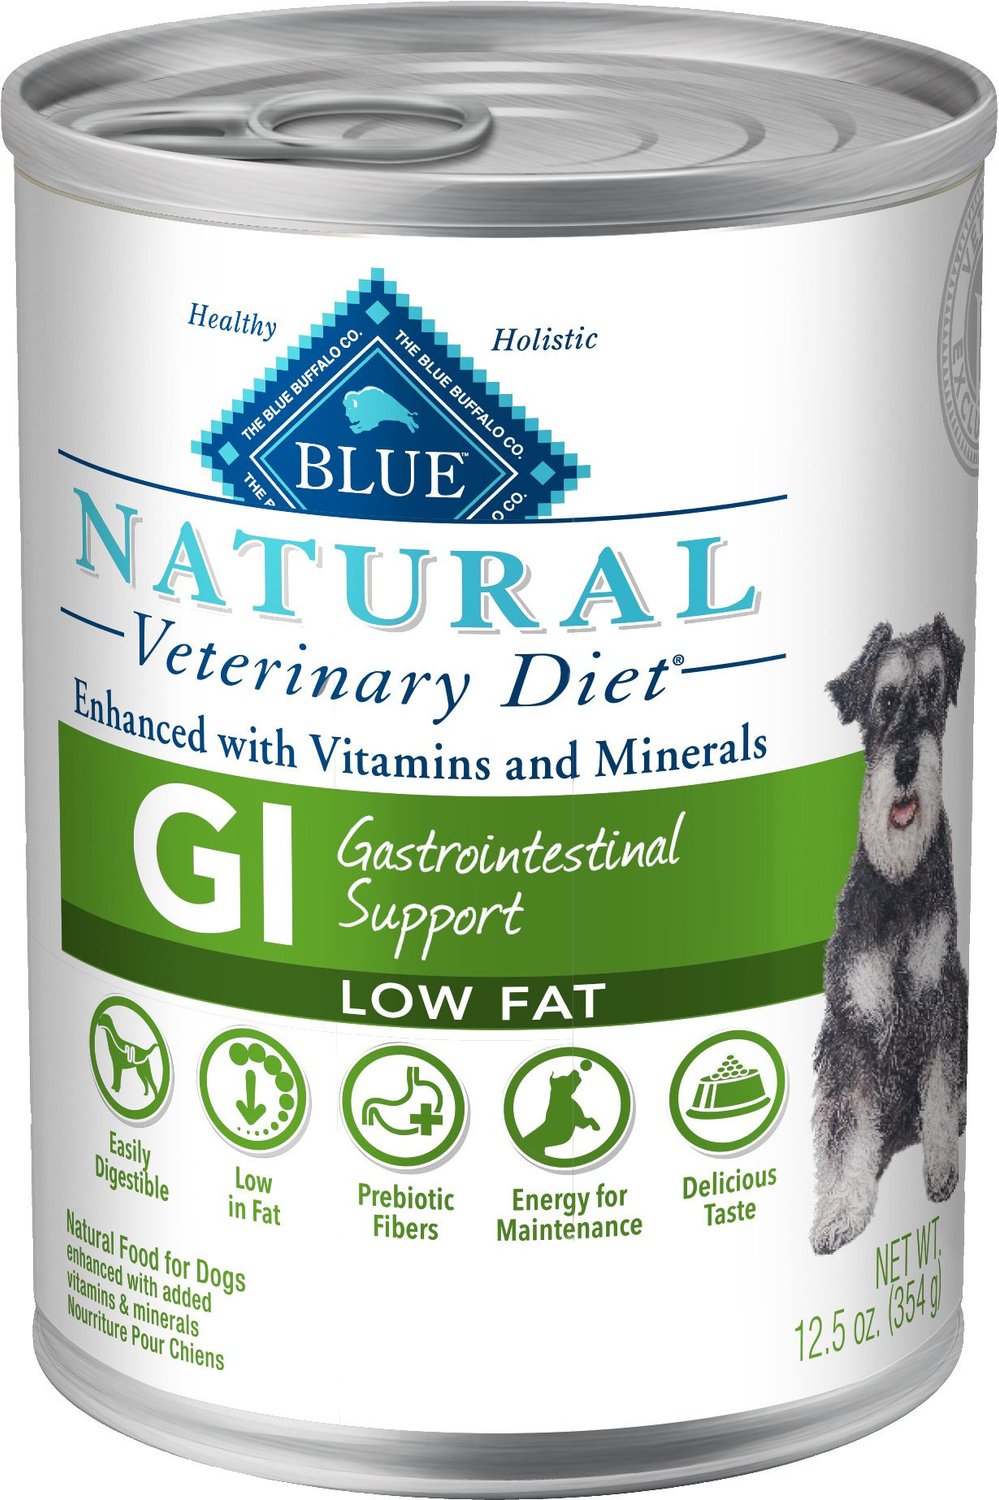 gastrointestinal food for dogs